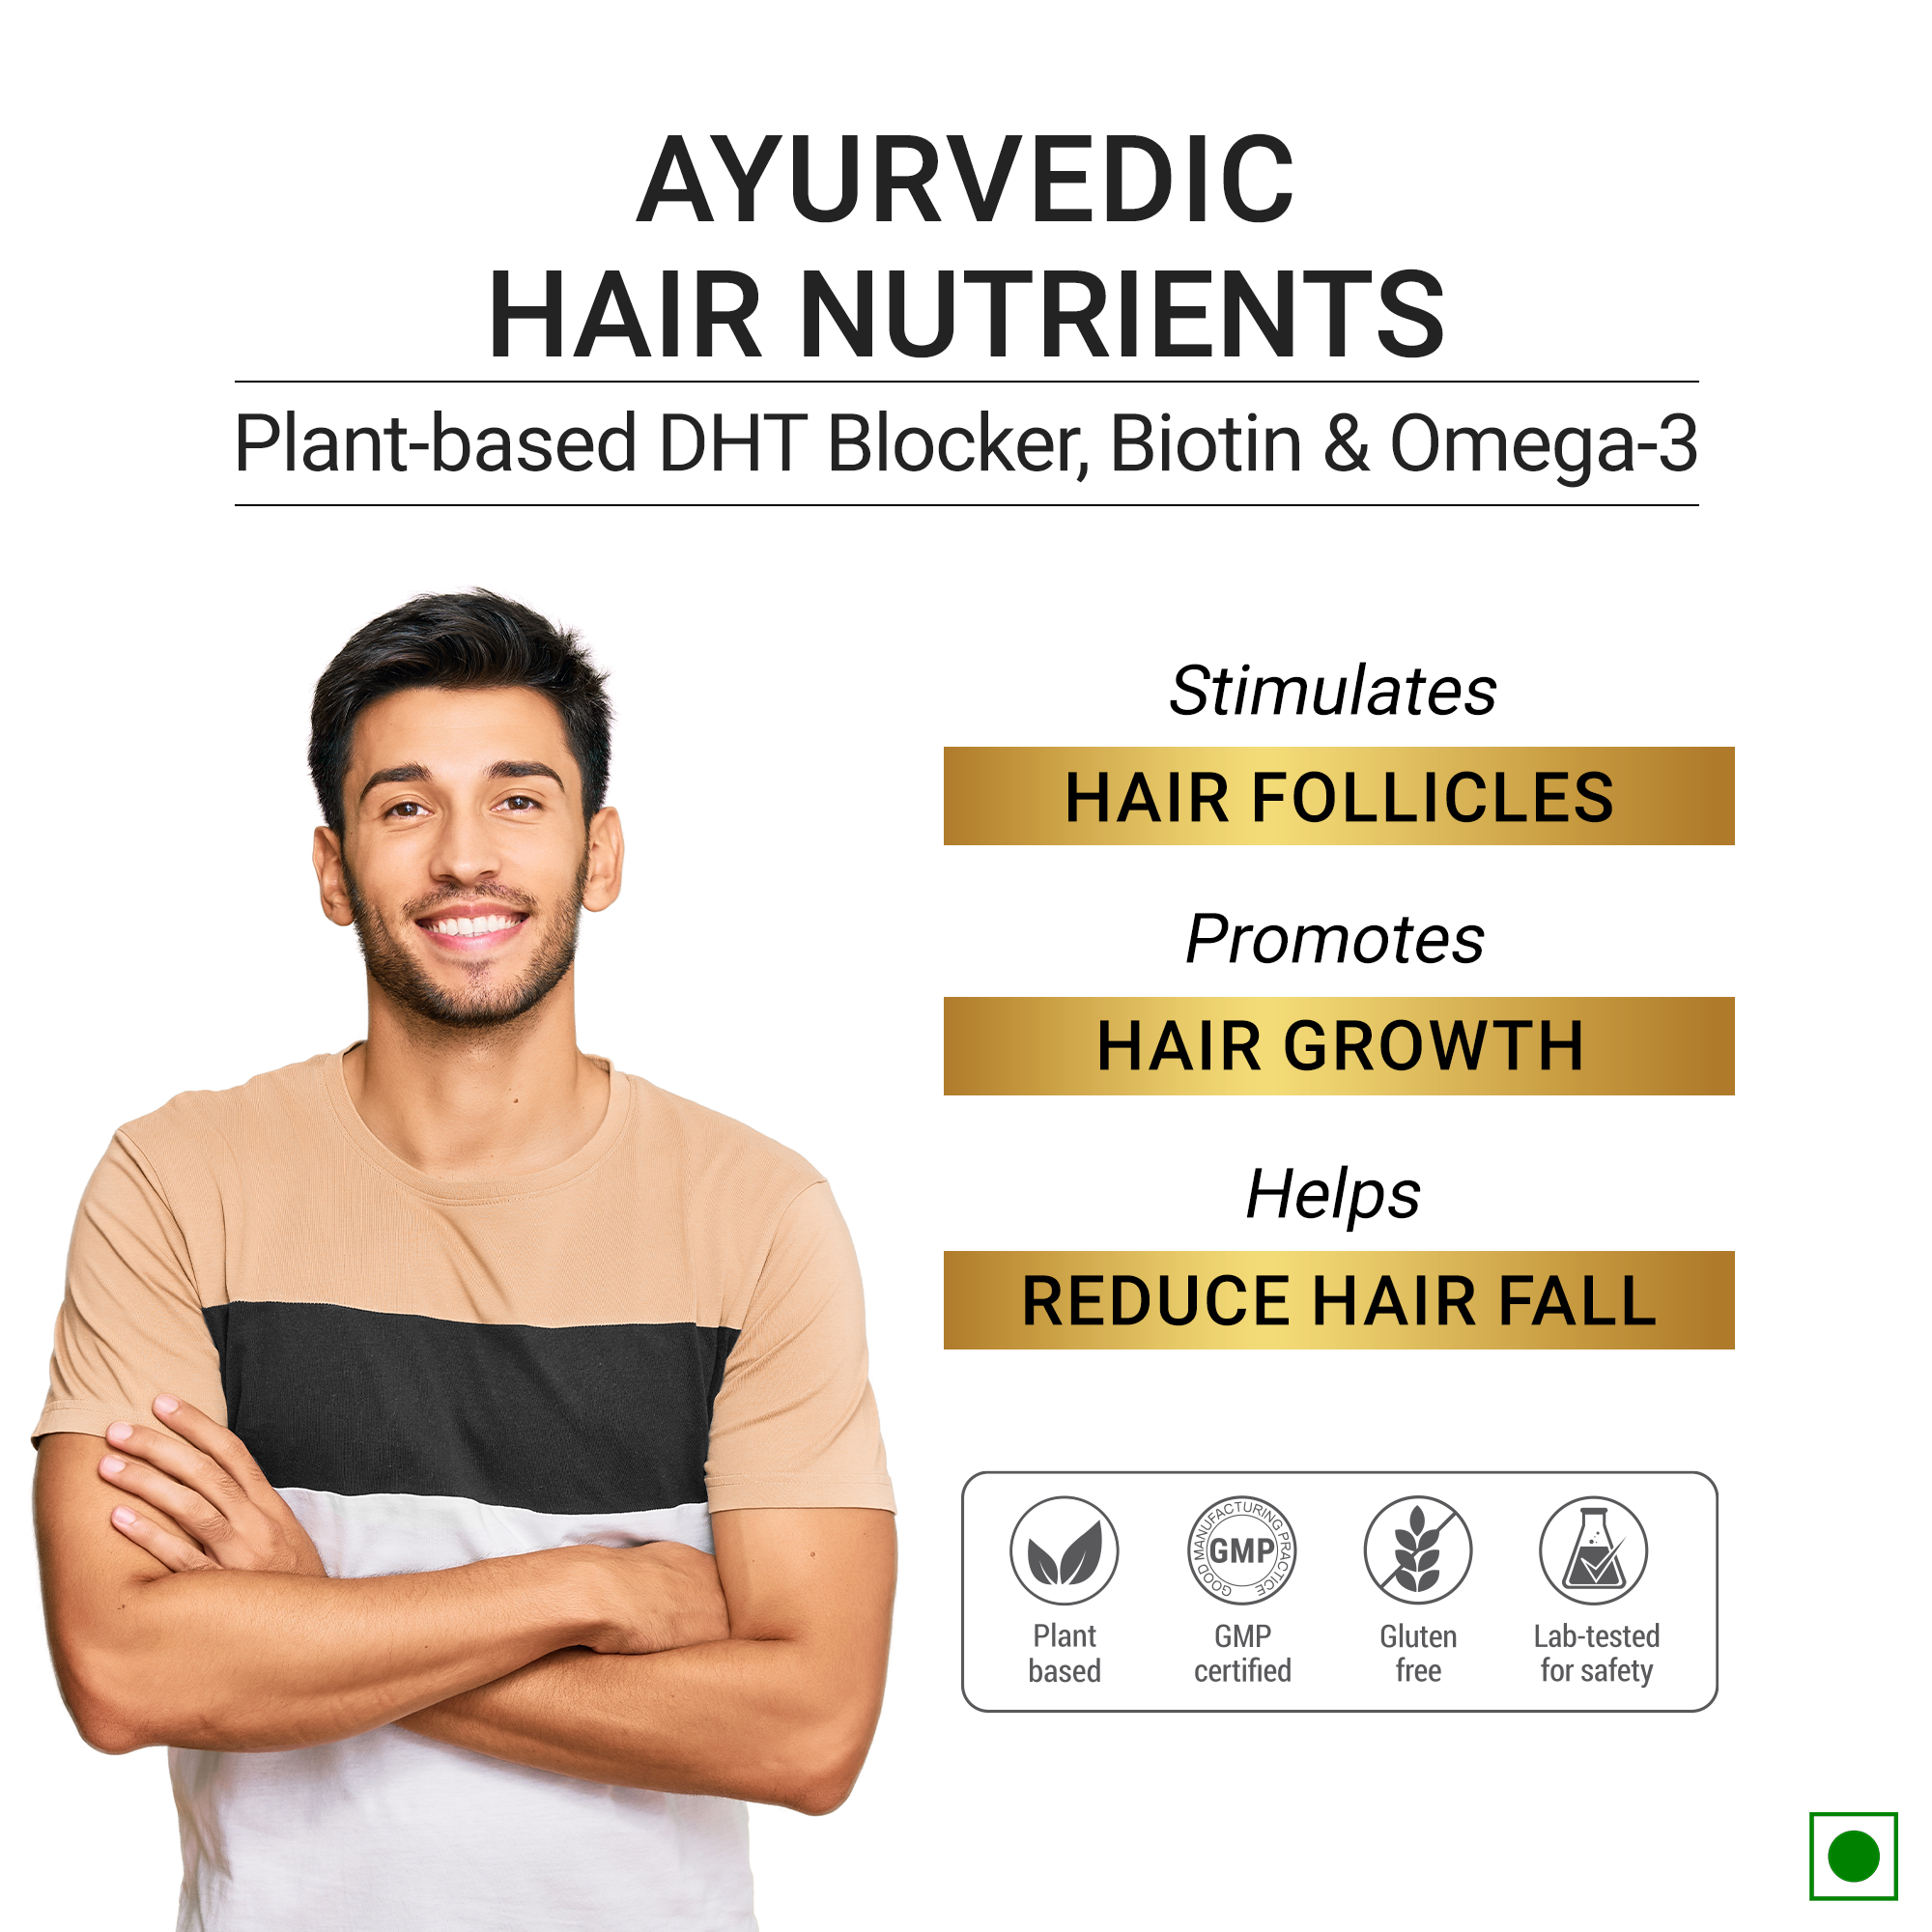 16 Foods To Prevent Hair Fall And Stimulate Hair Growth